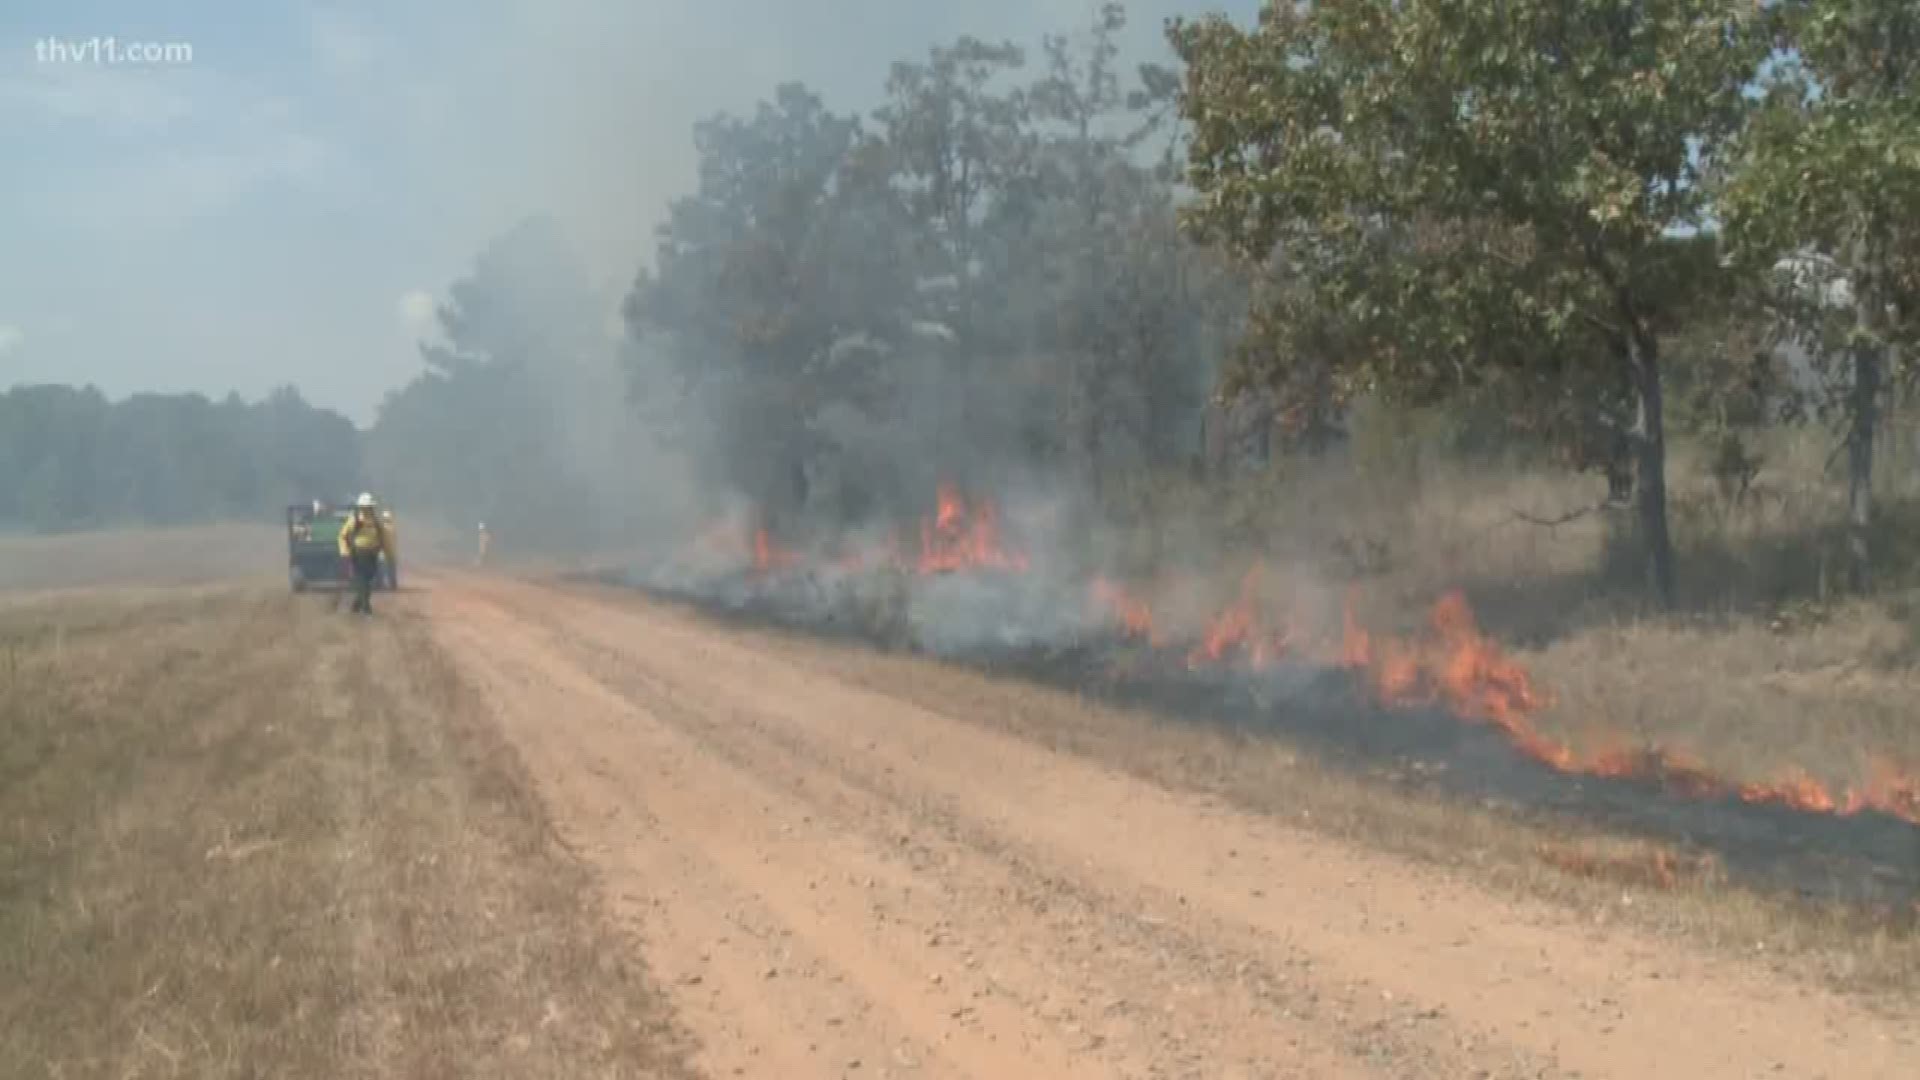 Beginning tomorrow, Hot Springs National Park will begin controlled burns to prevent uncontrolled wildfires.